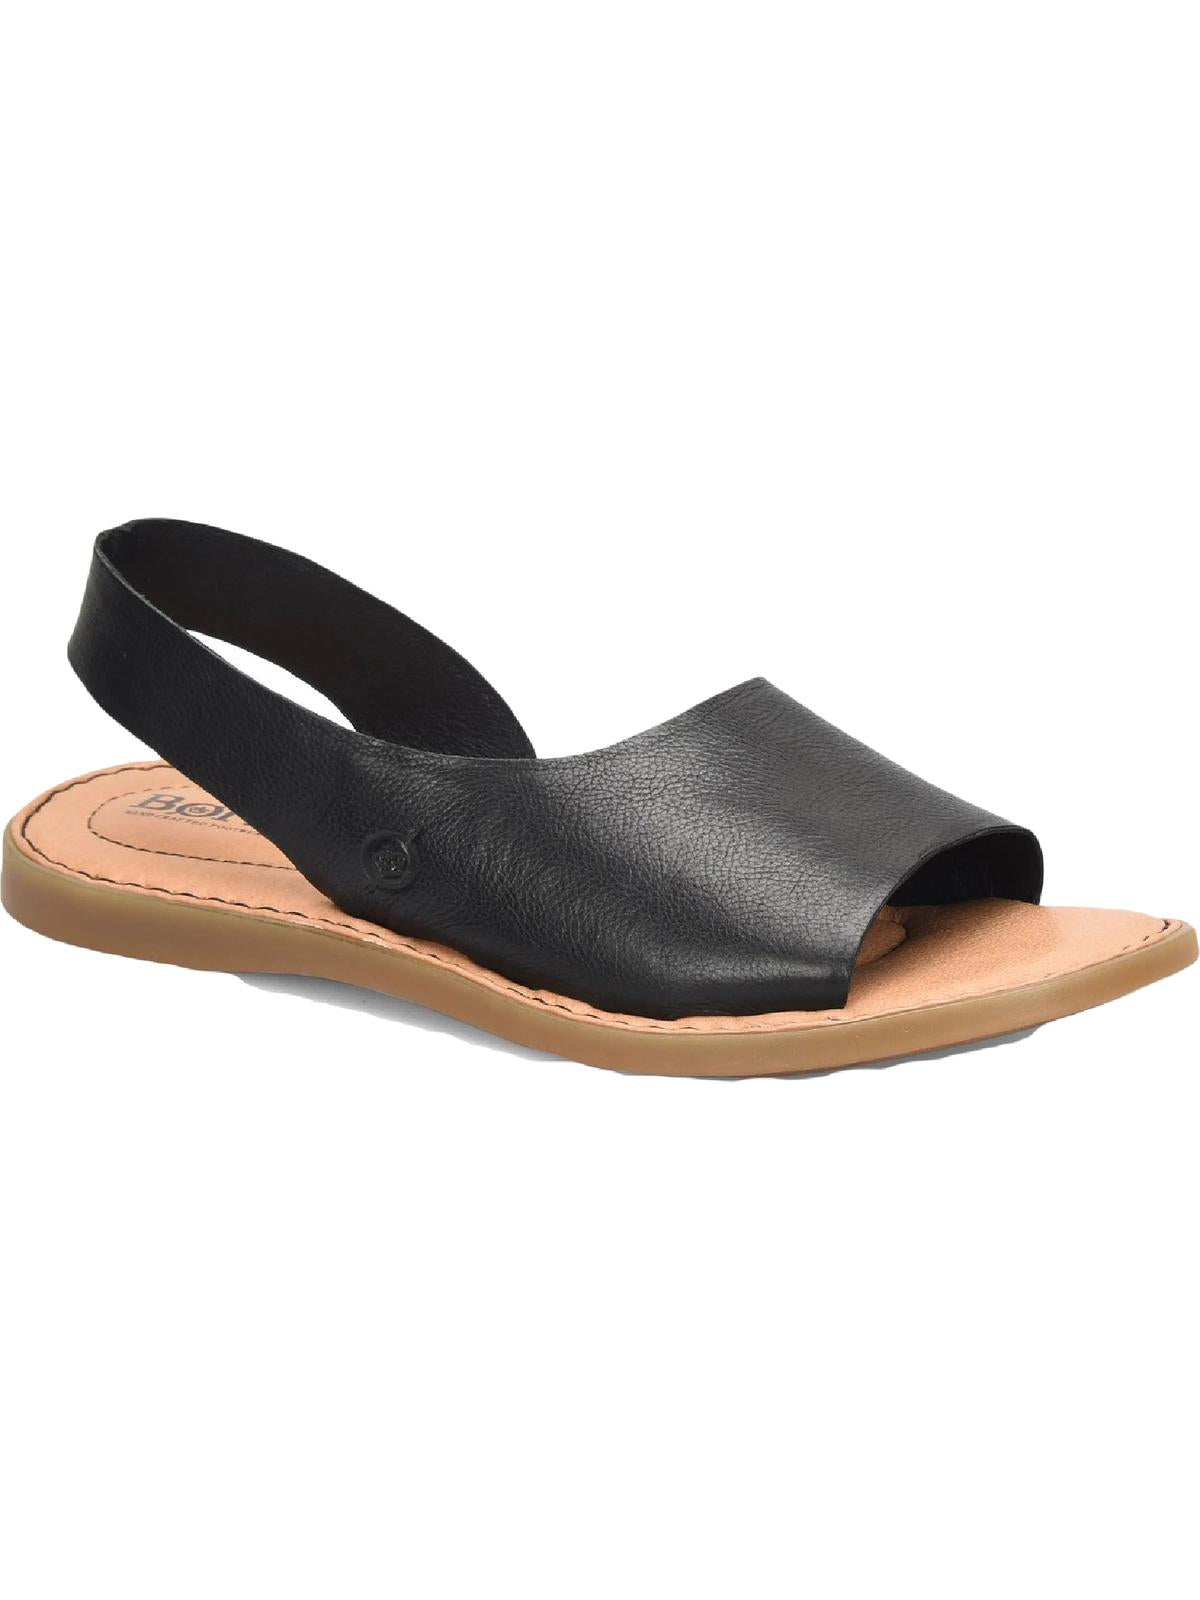 BORN Inlet Womens Leather Slip On Flat Sandals